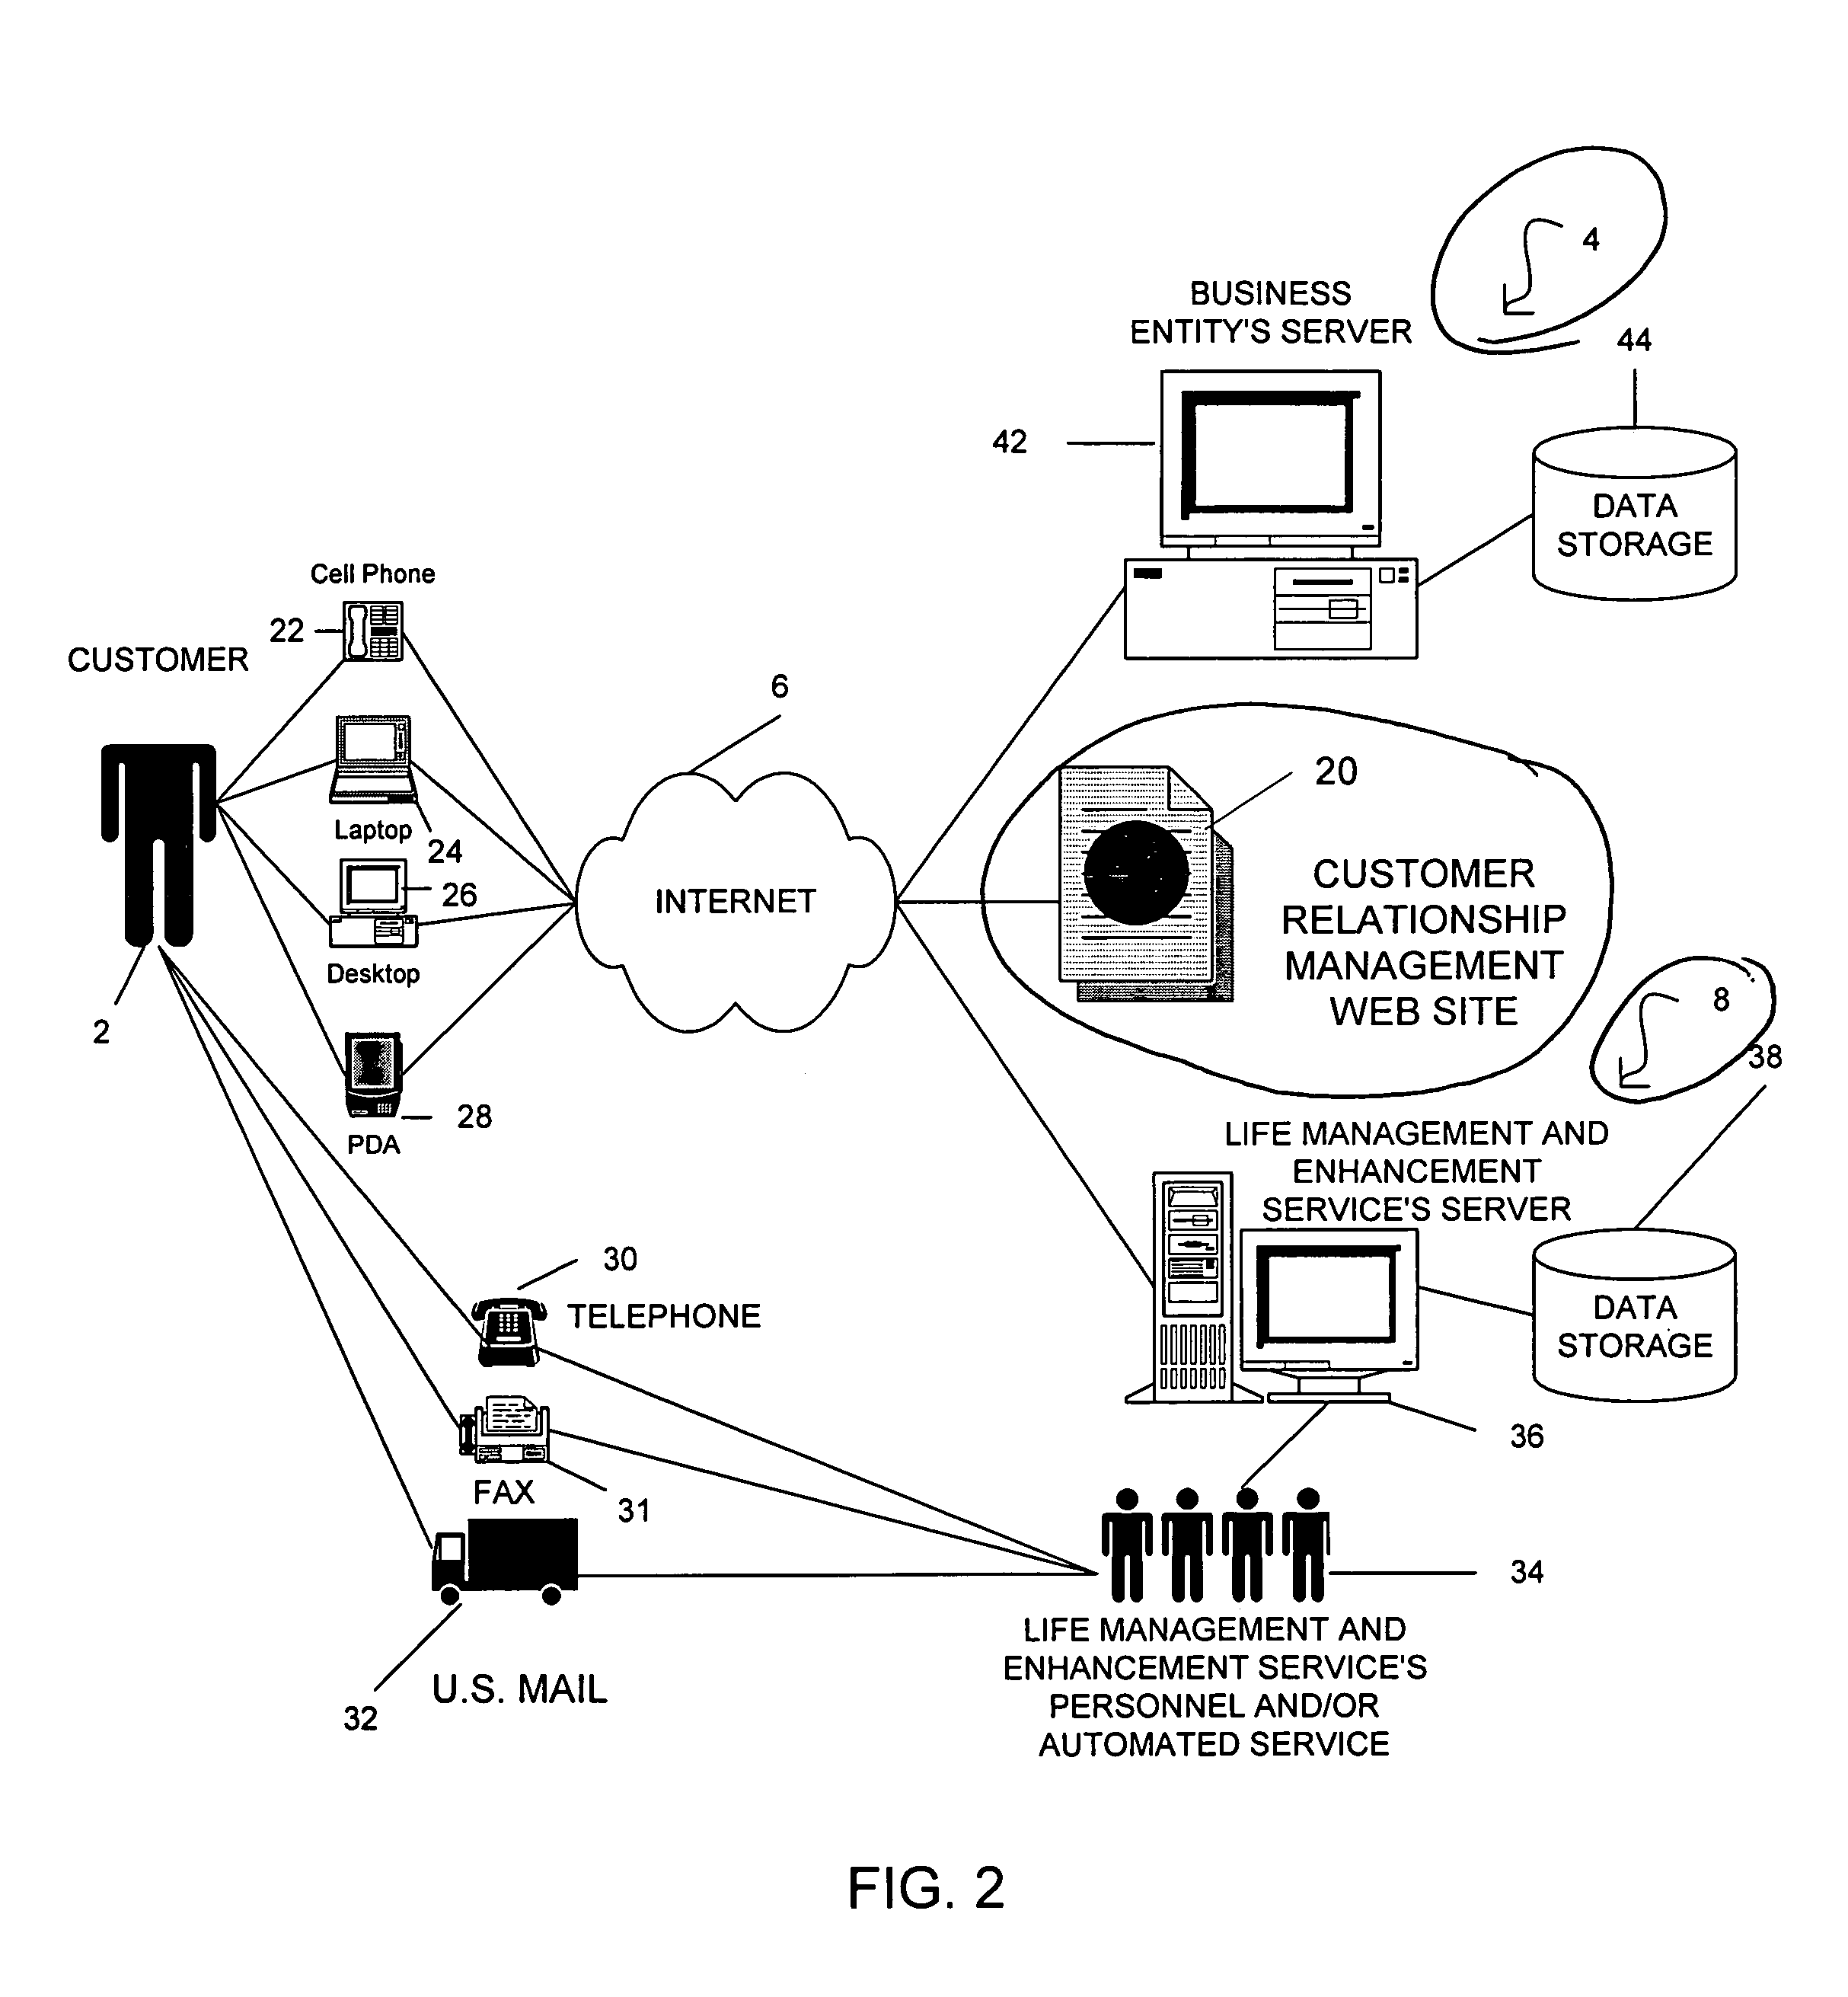 Methods and systems for providing life management and enhancement applications and services for telematics and other electronic medium